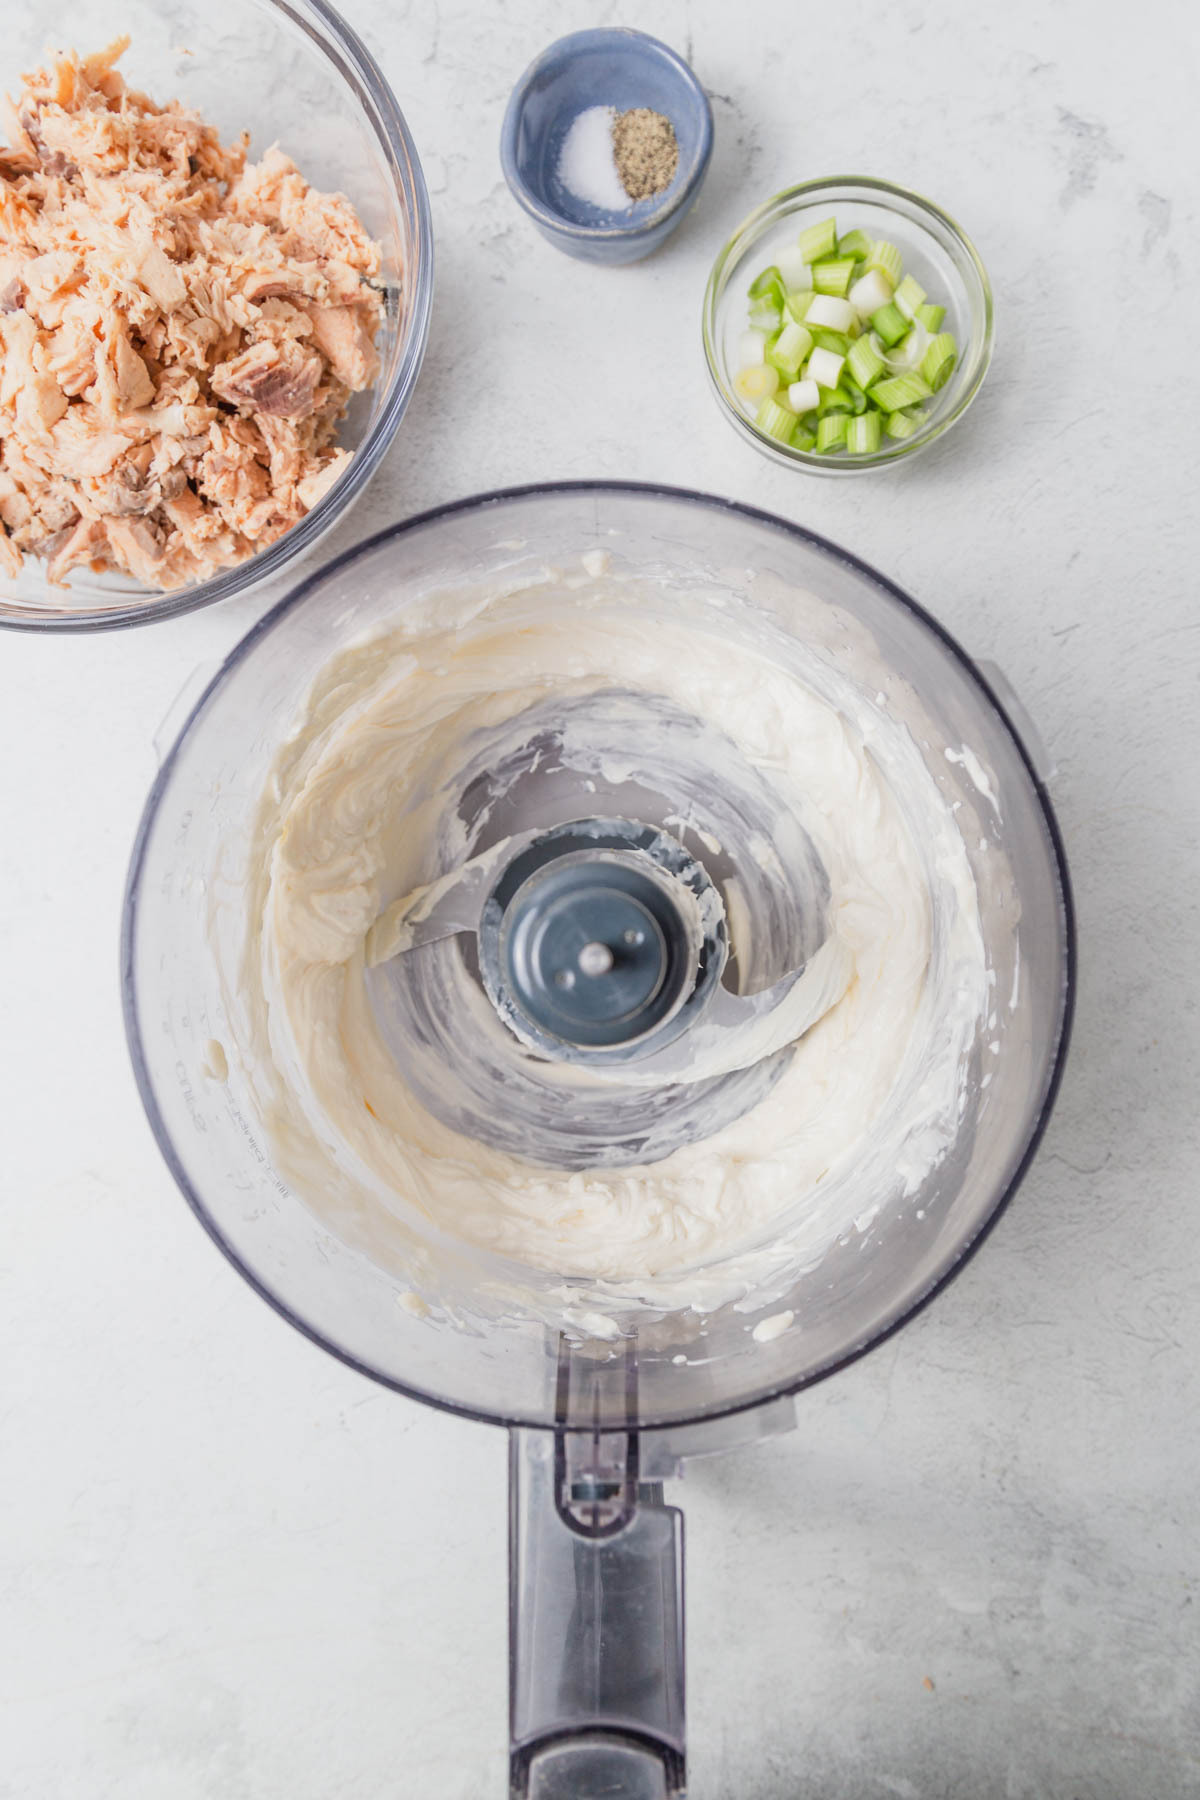 mixing the cream cheese and mayo in a food processor.